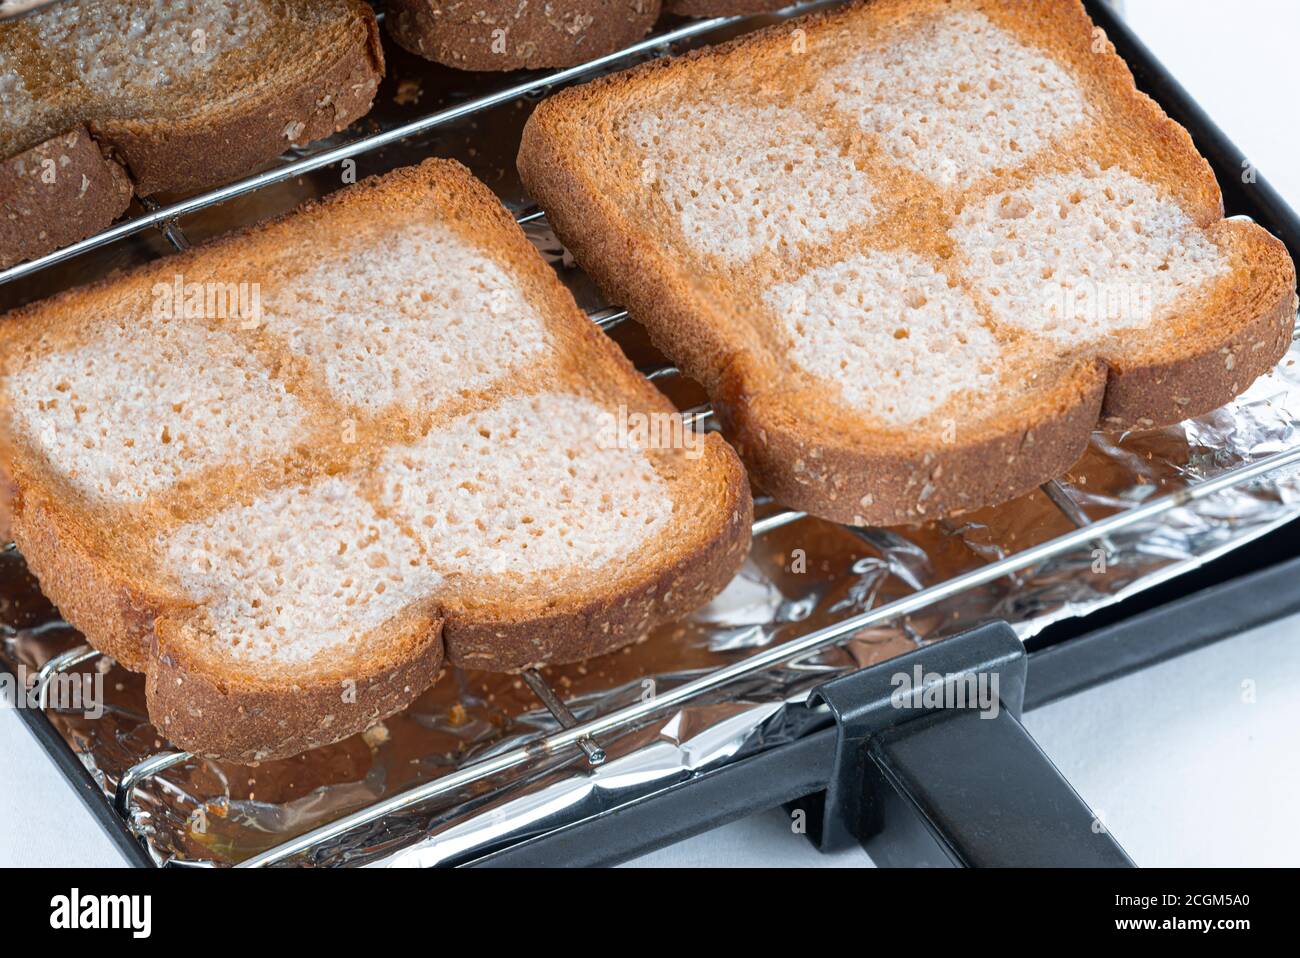 https://c8.alamy.com/comp/2CGM5A0/horizontal-shot-of-a-toaster-tray-with-four-pieces-of-buttered-wheat-bread-coming-out-of-a-toaster-2CGM5A0.jpg